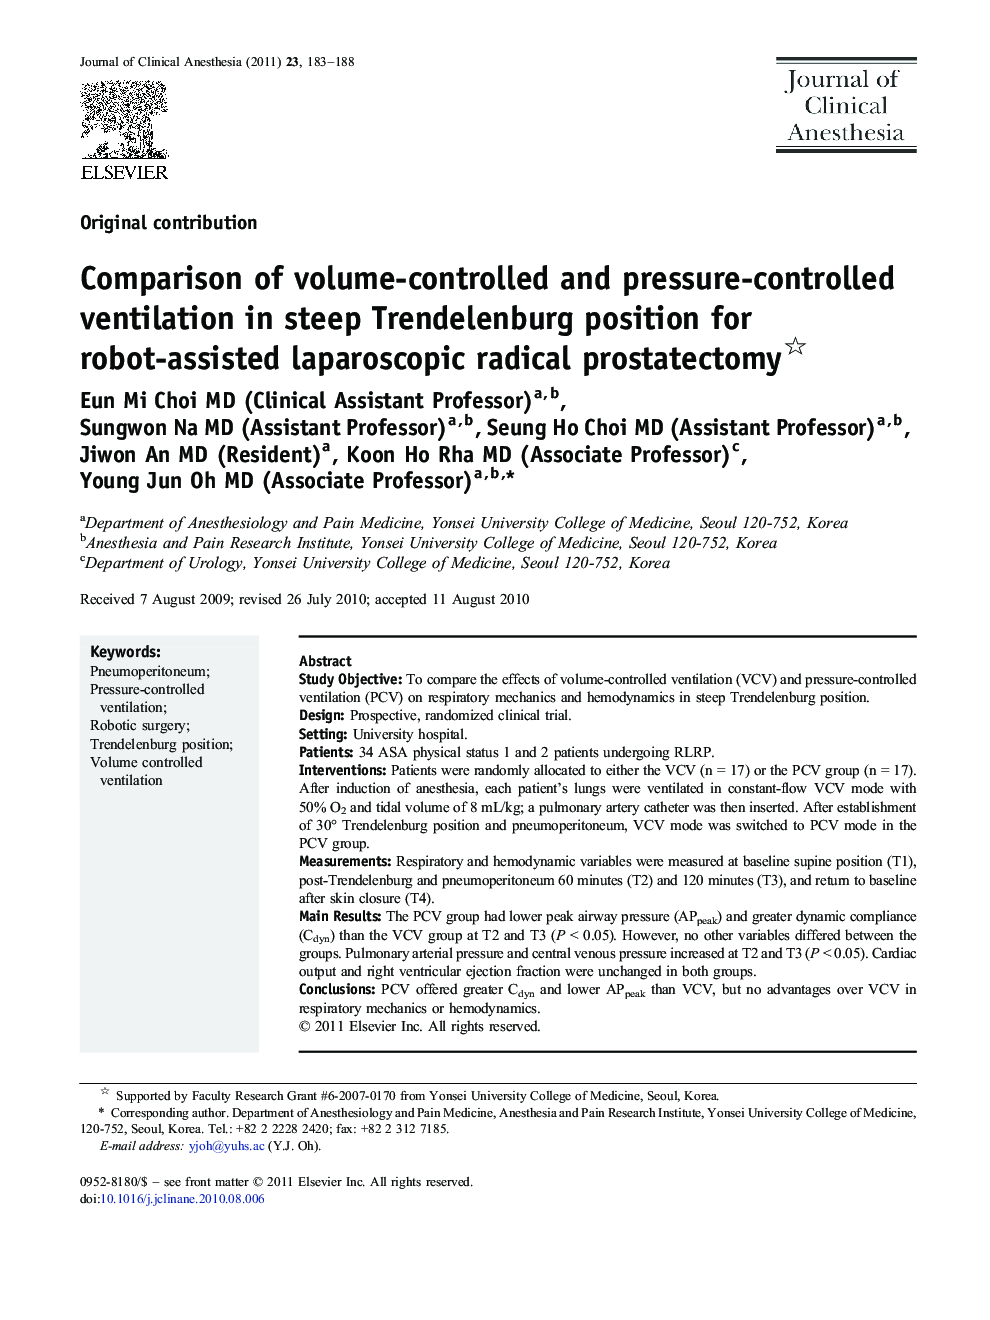 Comparison of volume-controlled and pressure-controlled ventilation in steep Trendelenburg position for robot-assisted laparoscopic radical prostatectomy 